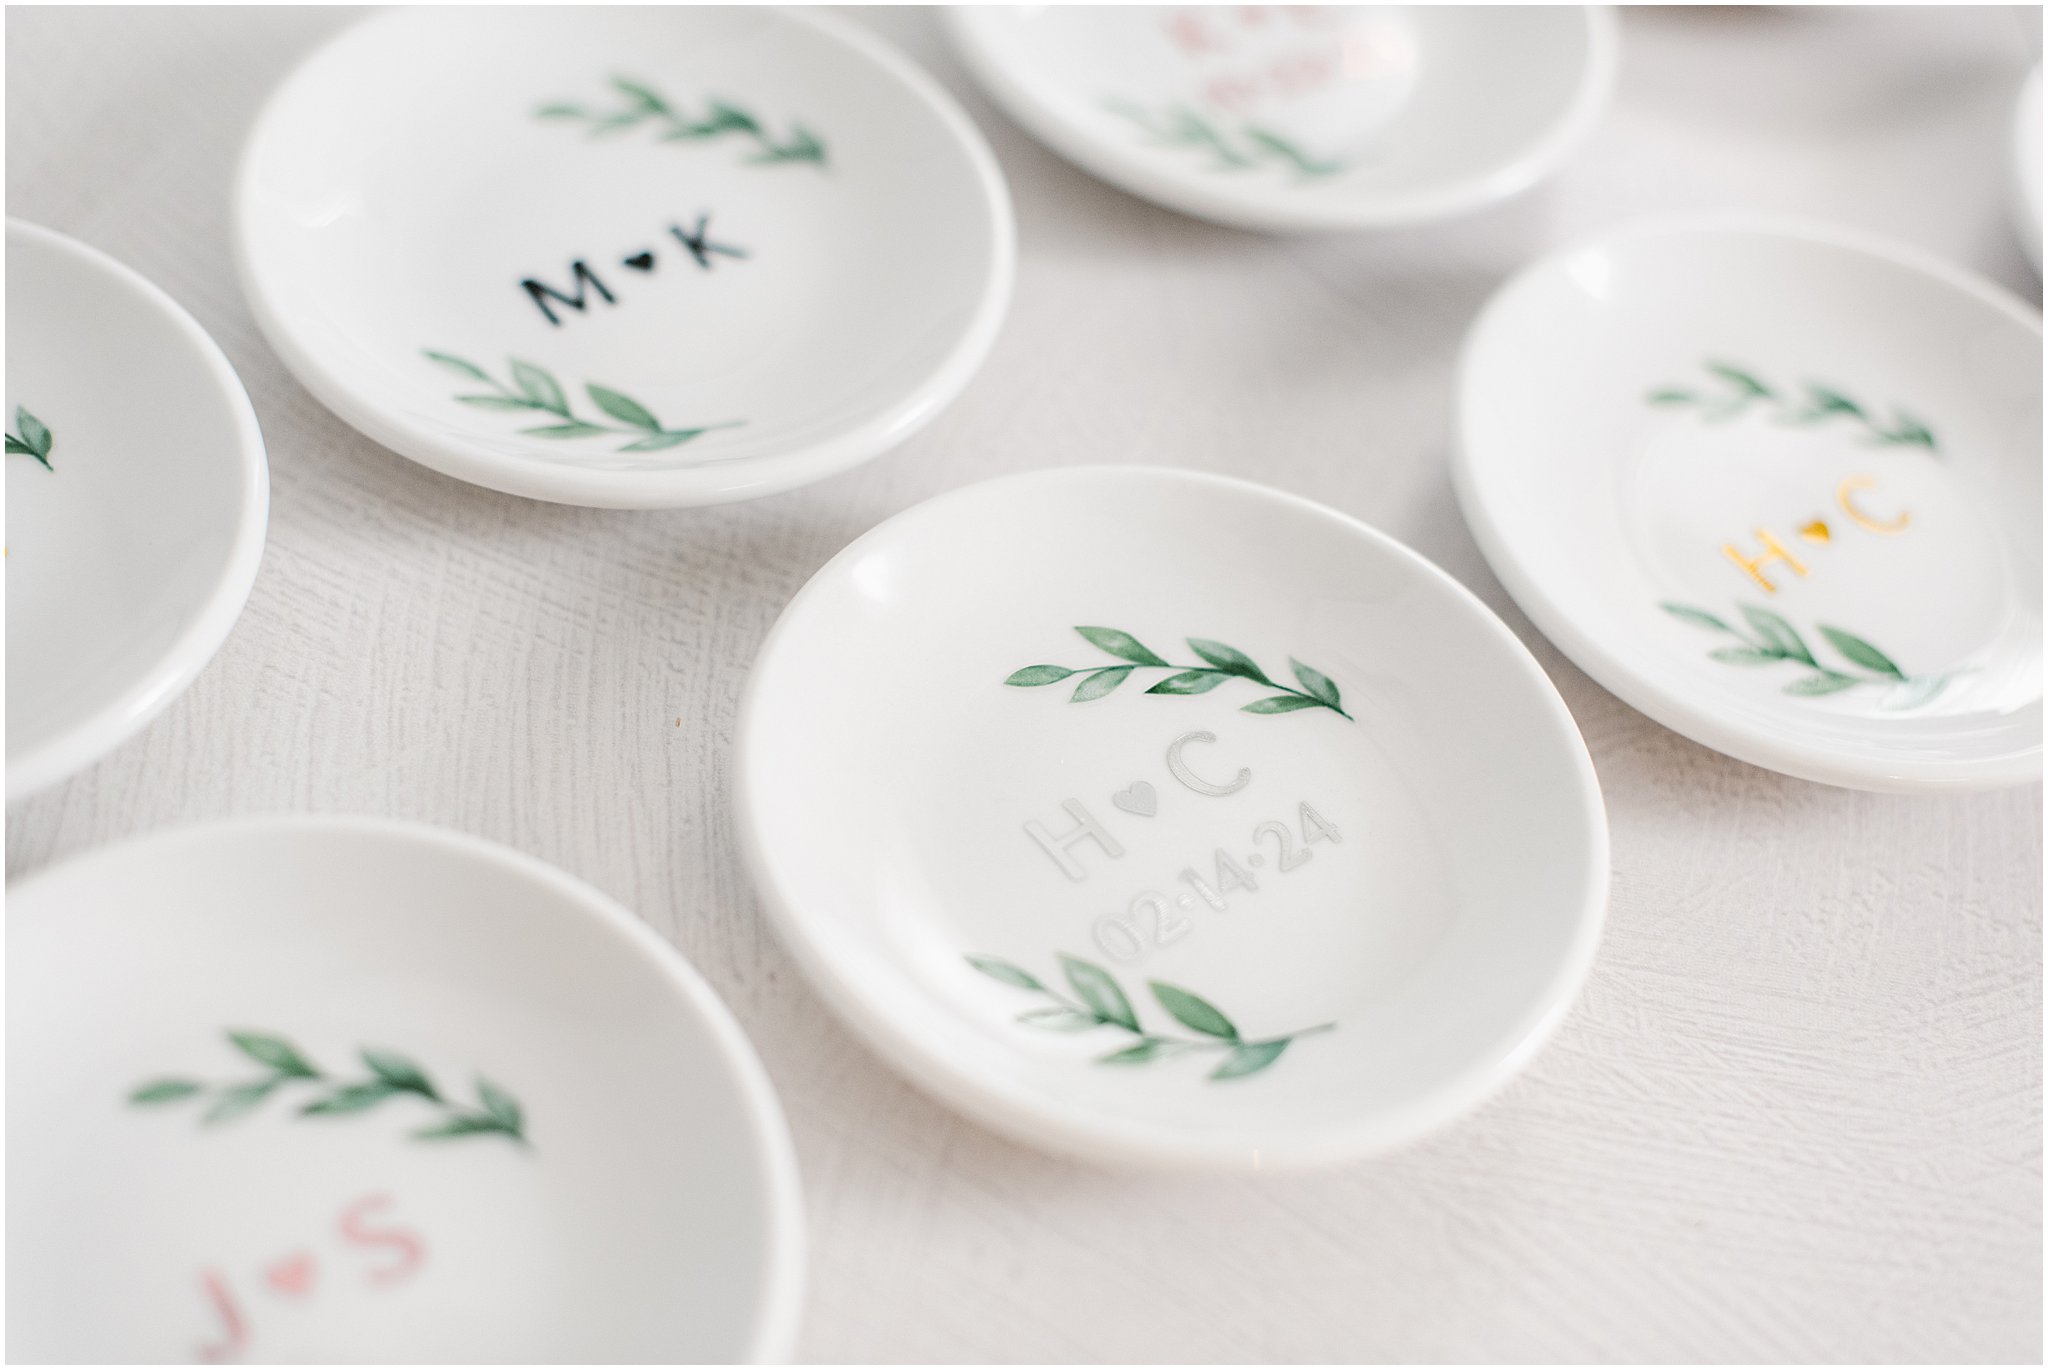 Product photography of ring dishes for an Etsy store listing